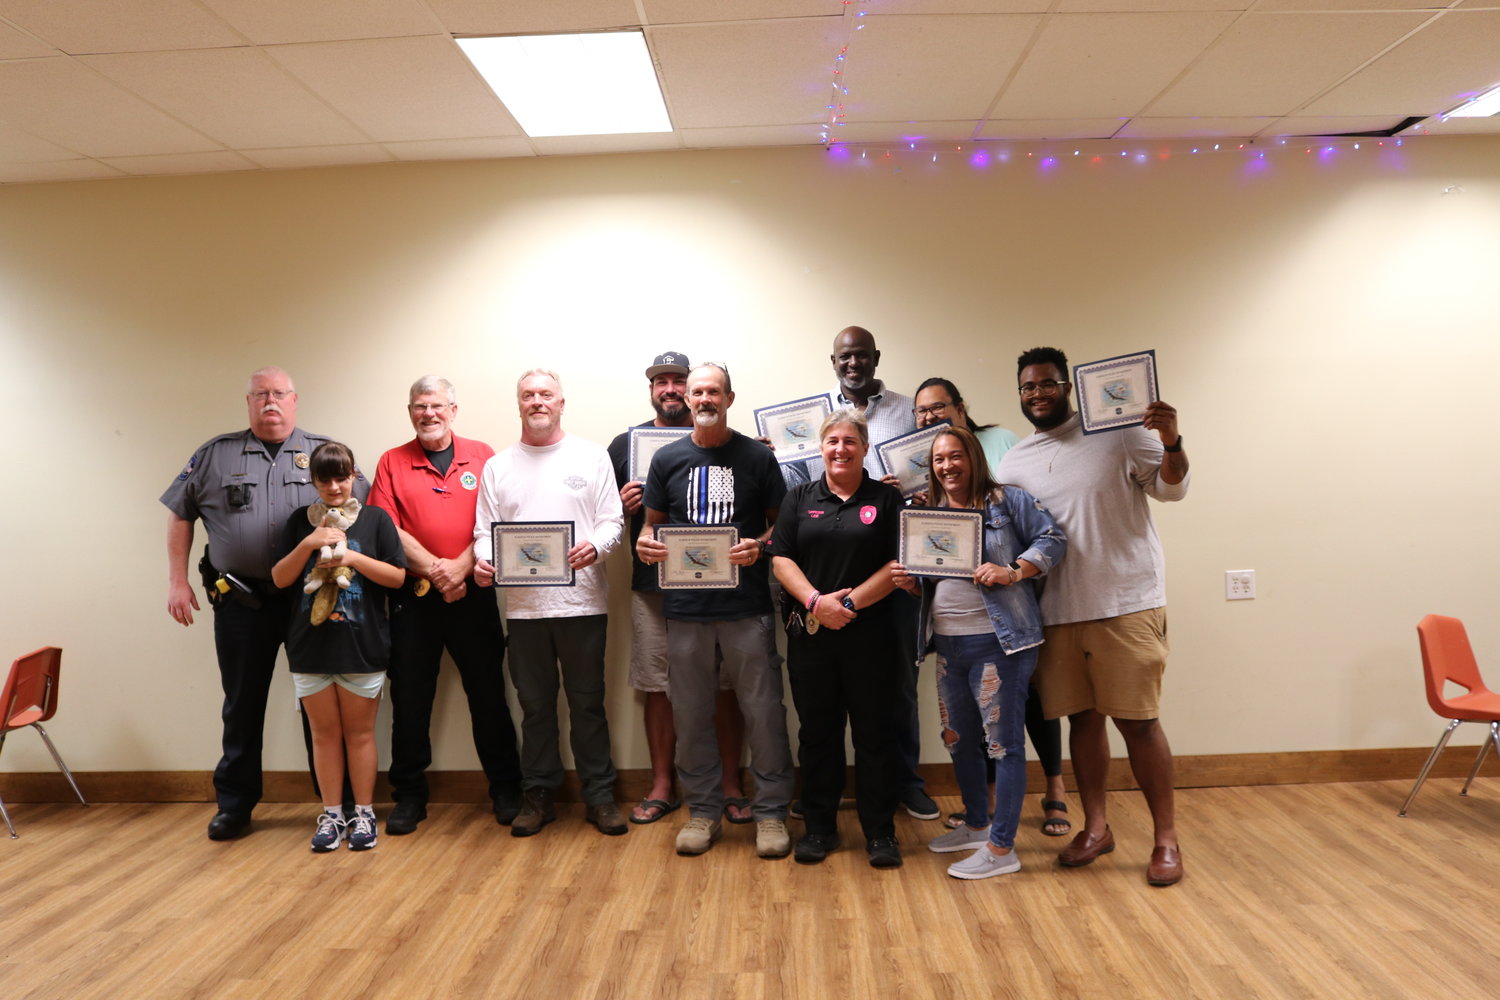 A ceremony for the first graduating class of the newly formed Elberta Citizen’s Academy was held on Thursday, Oct. 21 at the Elberta Fireman’s Hall.